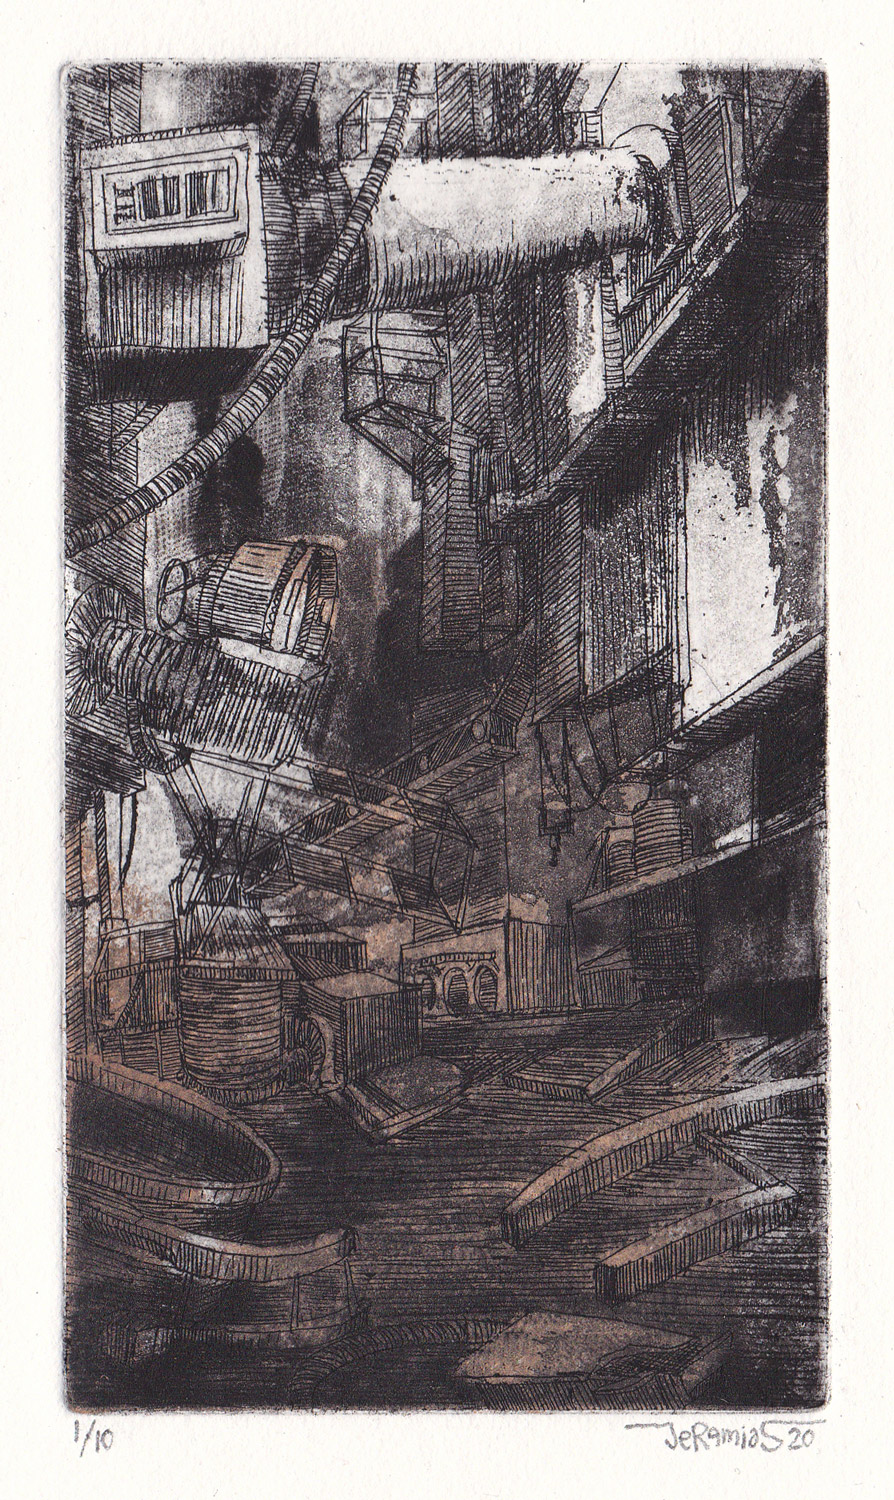 From the series: MACHINES 020; 8 x 14 cm; etching; 2020